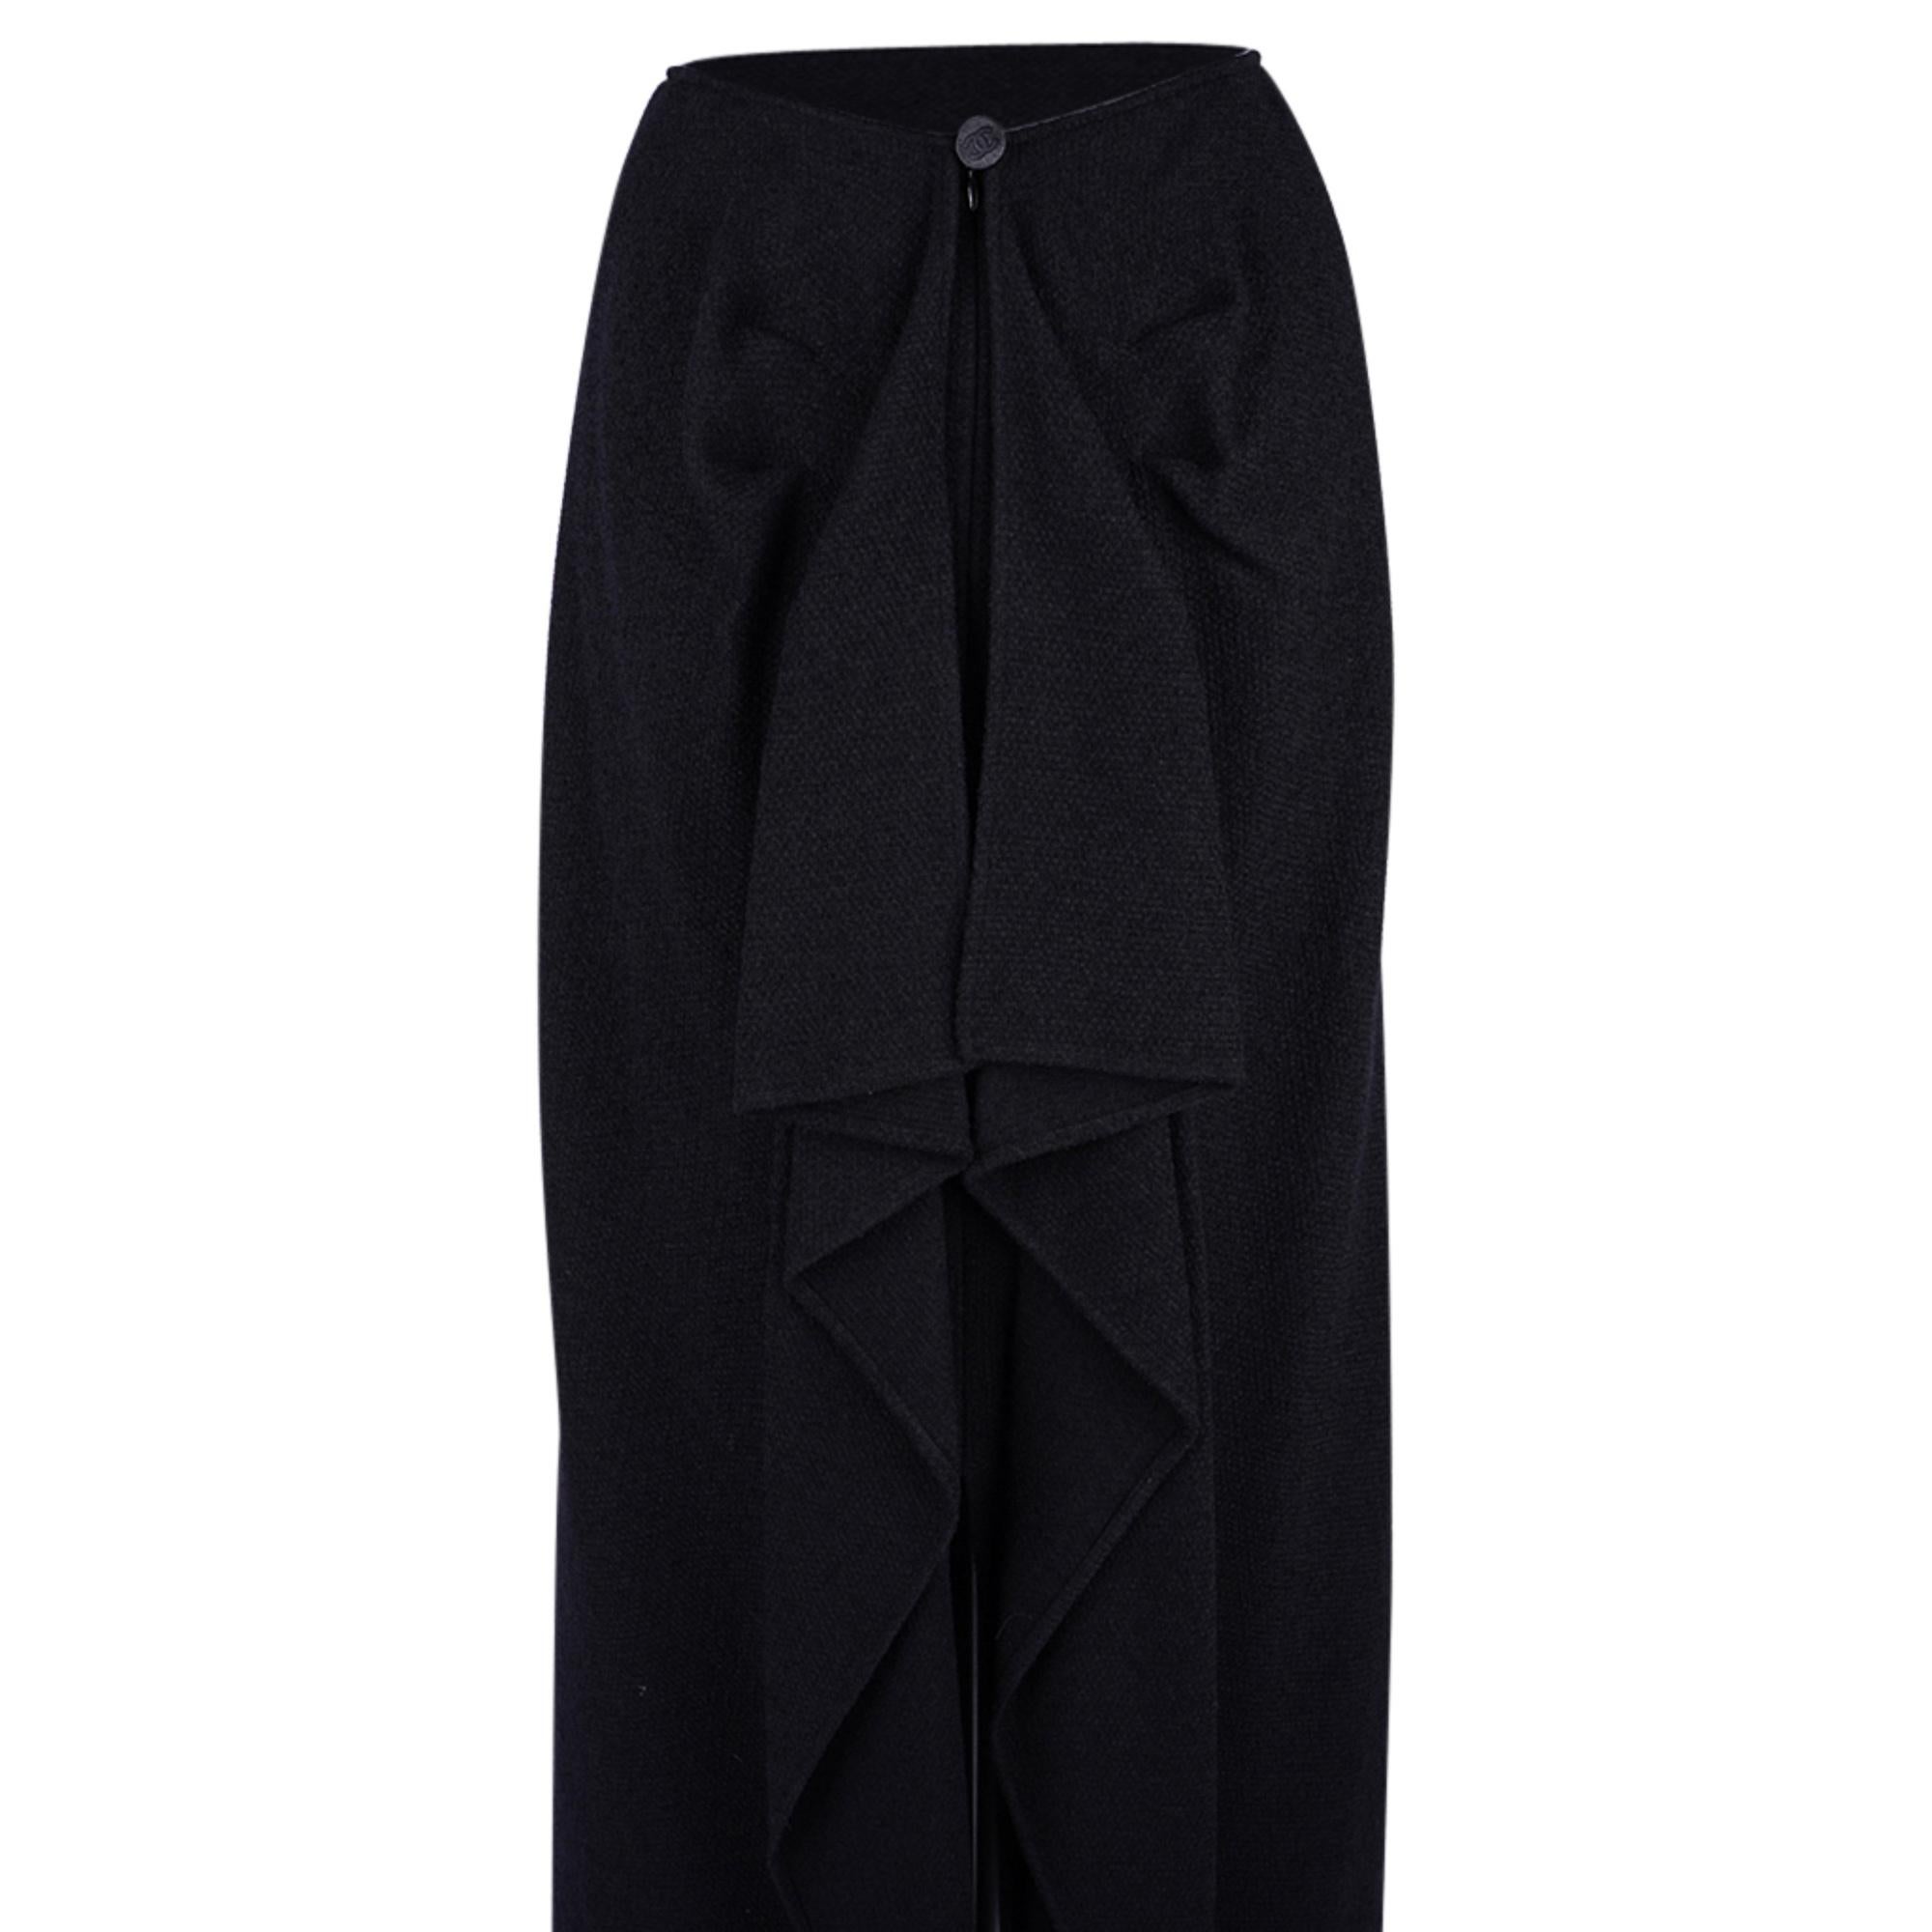 Chanel 98A Long Straight Skirt Beautifully Draped Rear 36 / 4 For Sale 4